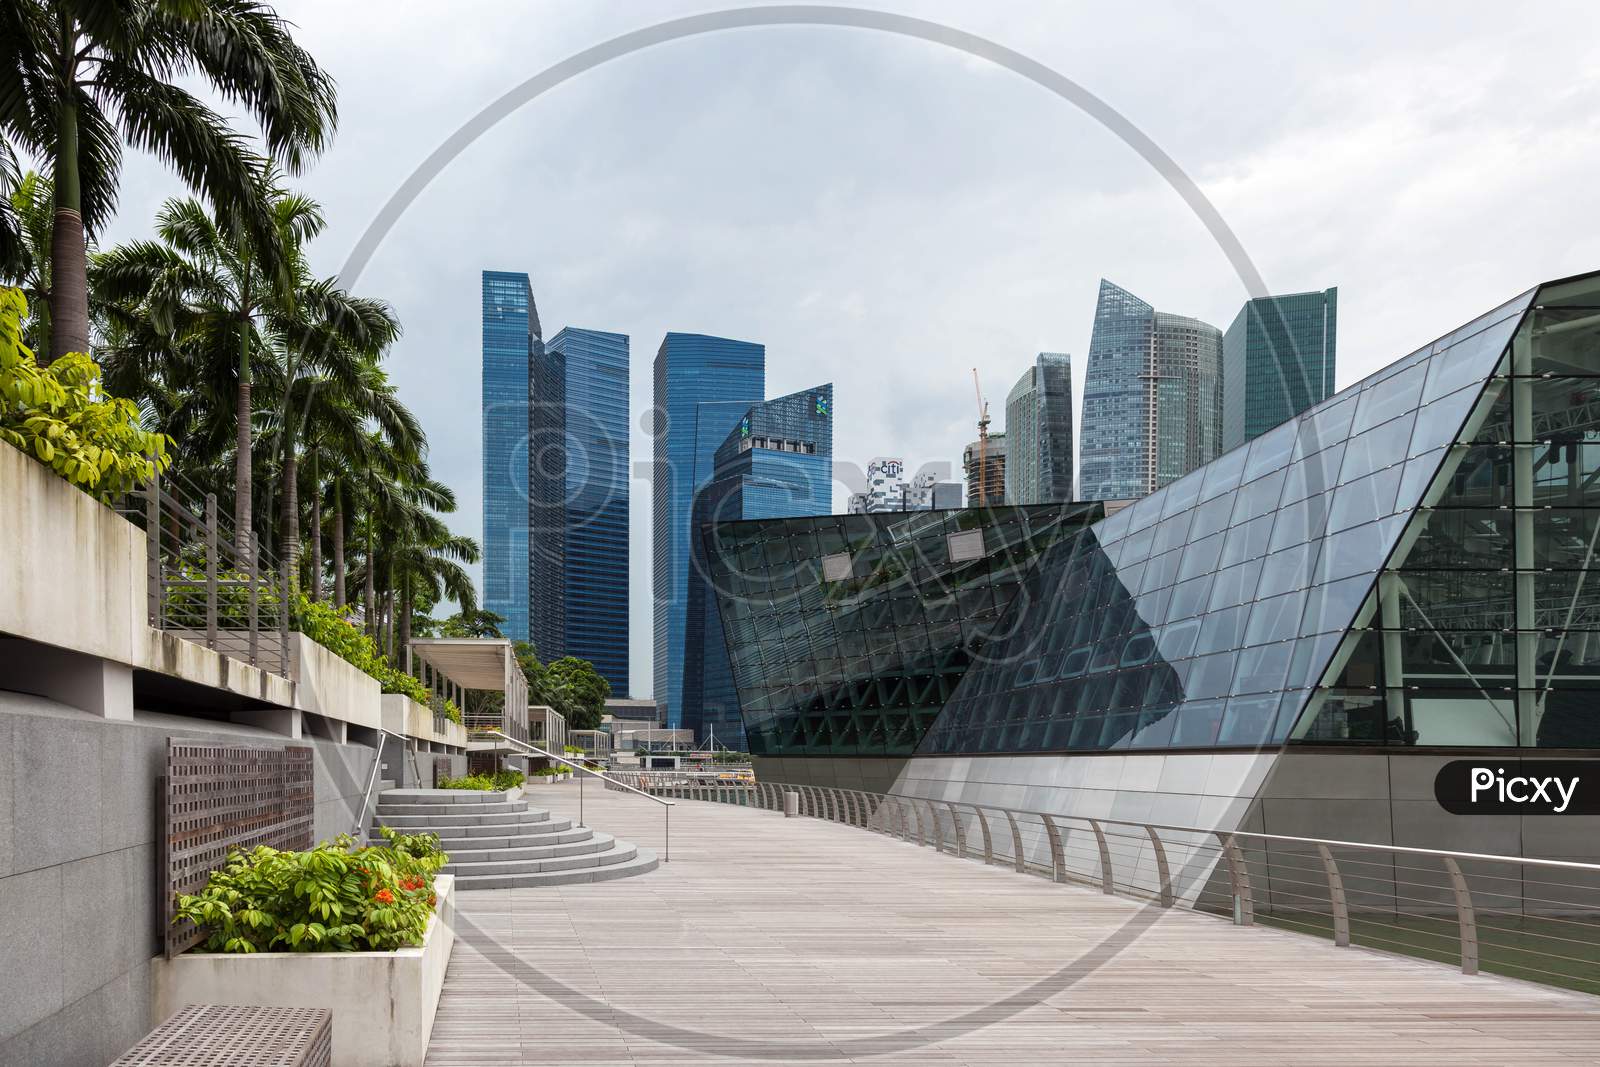 View Of The Esplanade Outside The Marina Bay Sands Shopping Centre In Singapore